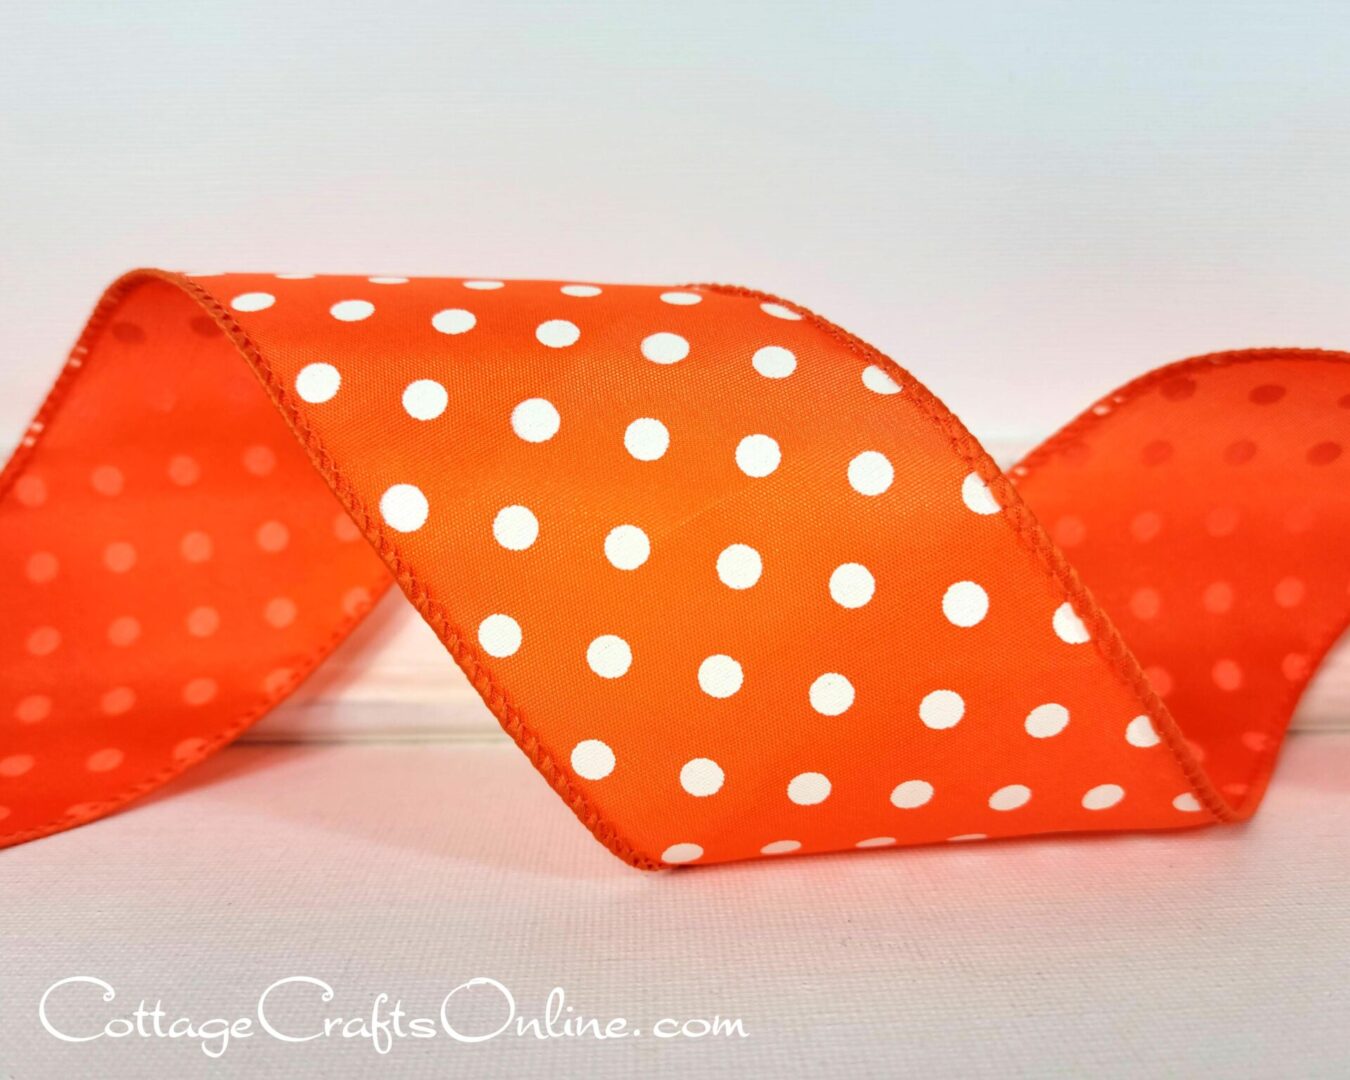 A close up of an orange ribbon with white polka dots